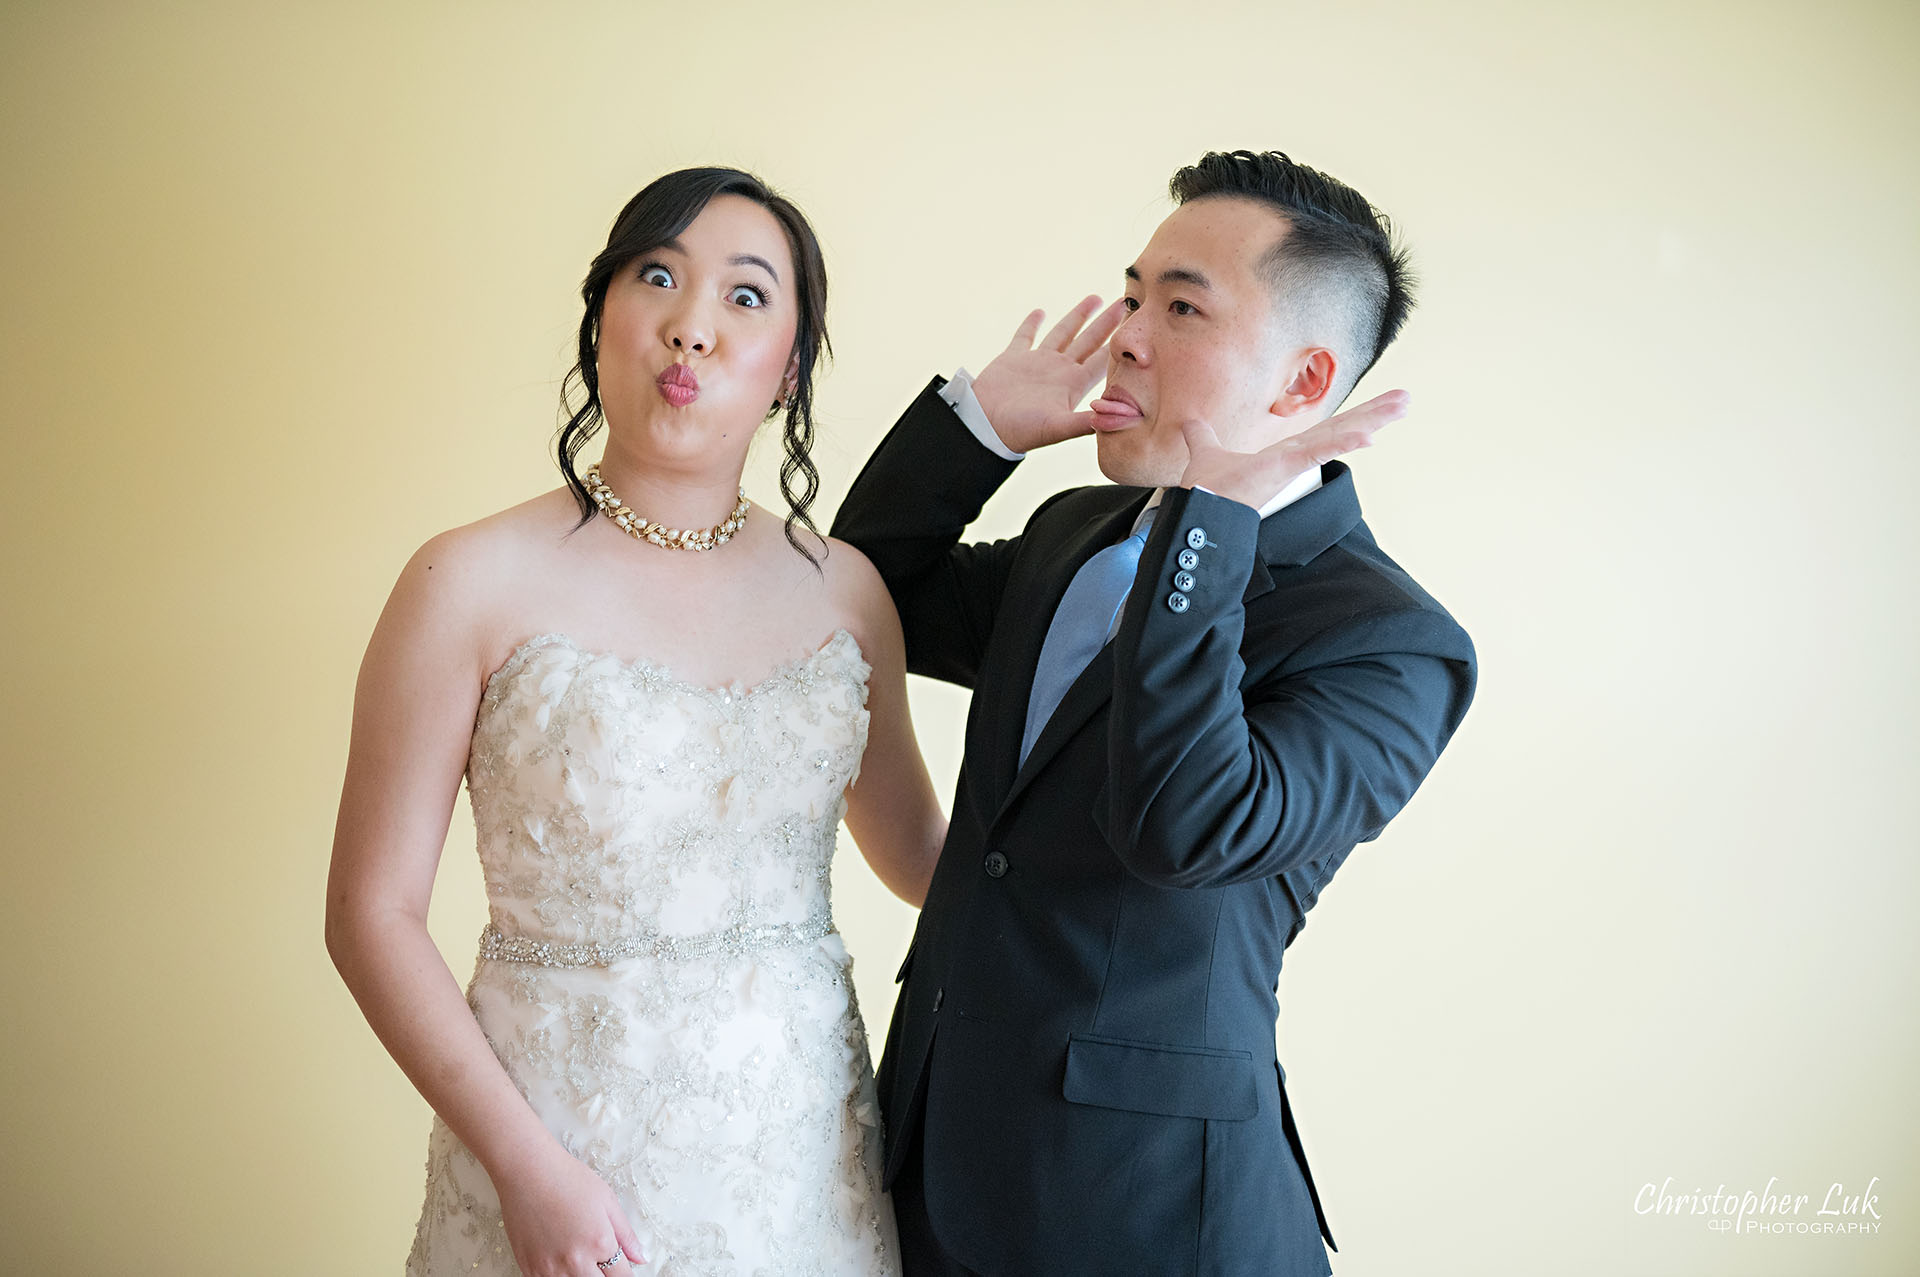 Christopher Luk Toronto Wedding Photographer Bridle Trail Baptist Church Unionville Main Street Crystal Fountain Event Venue Bride Bridal Brother Sibling Funny Faces Natural Photojournalistic Candid